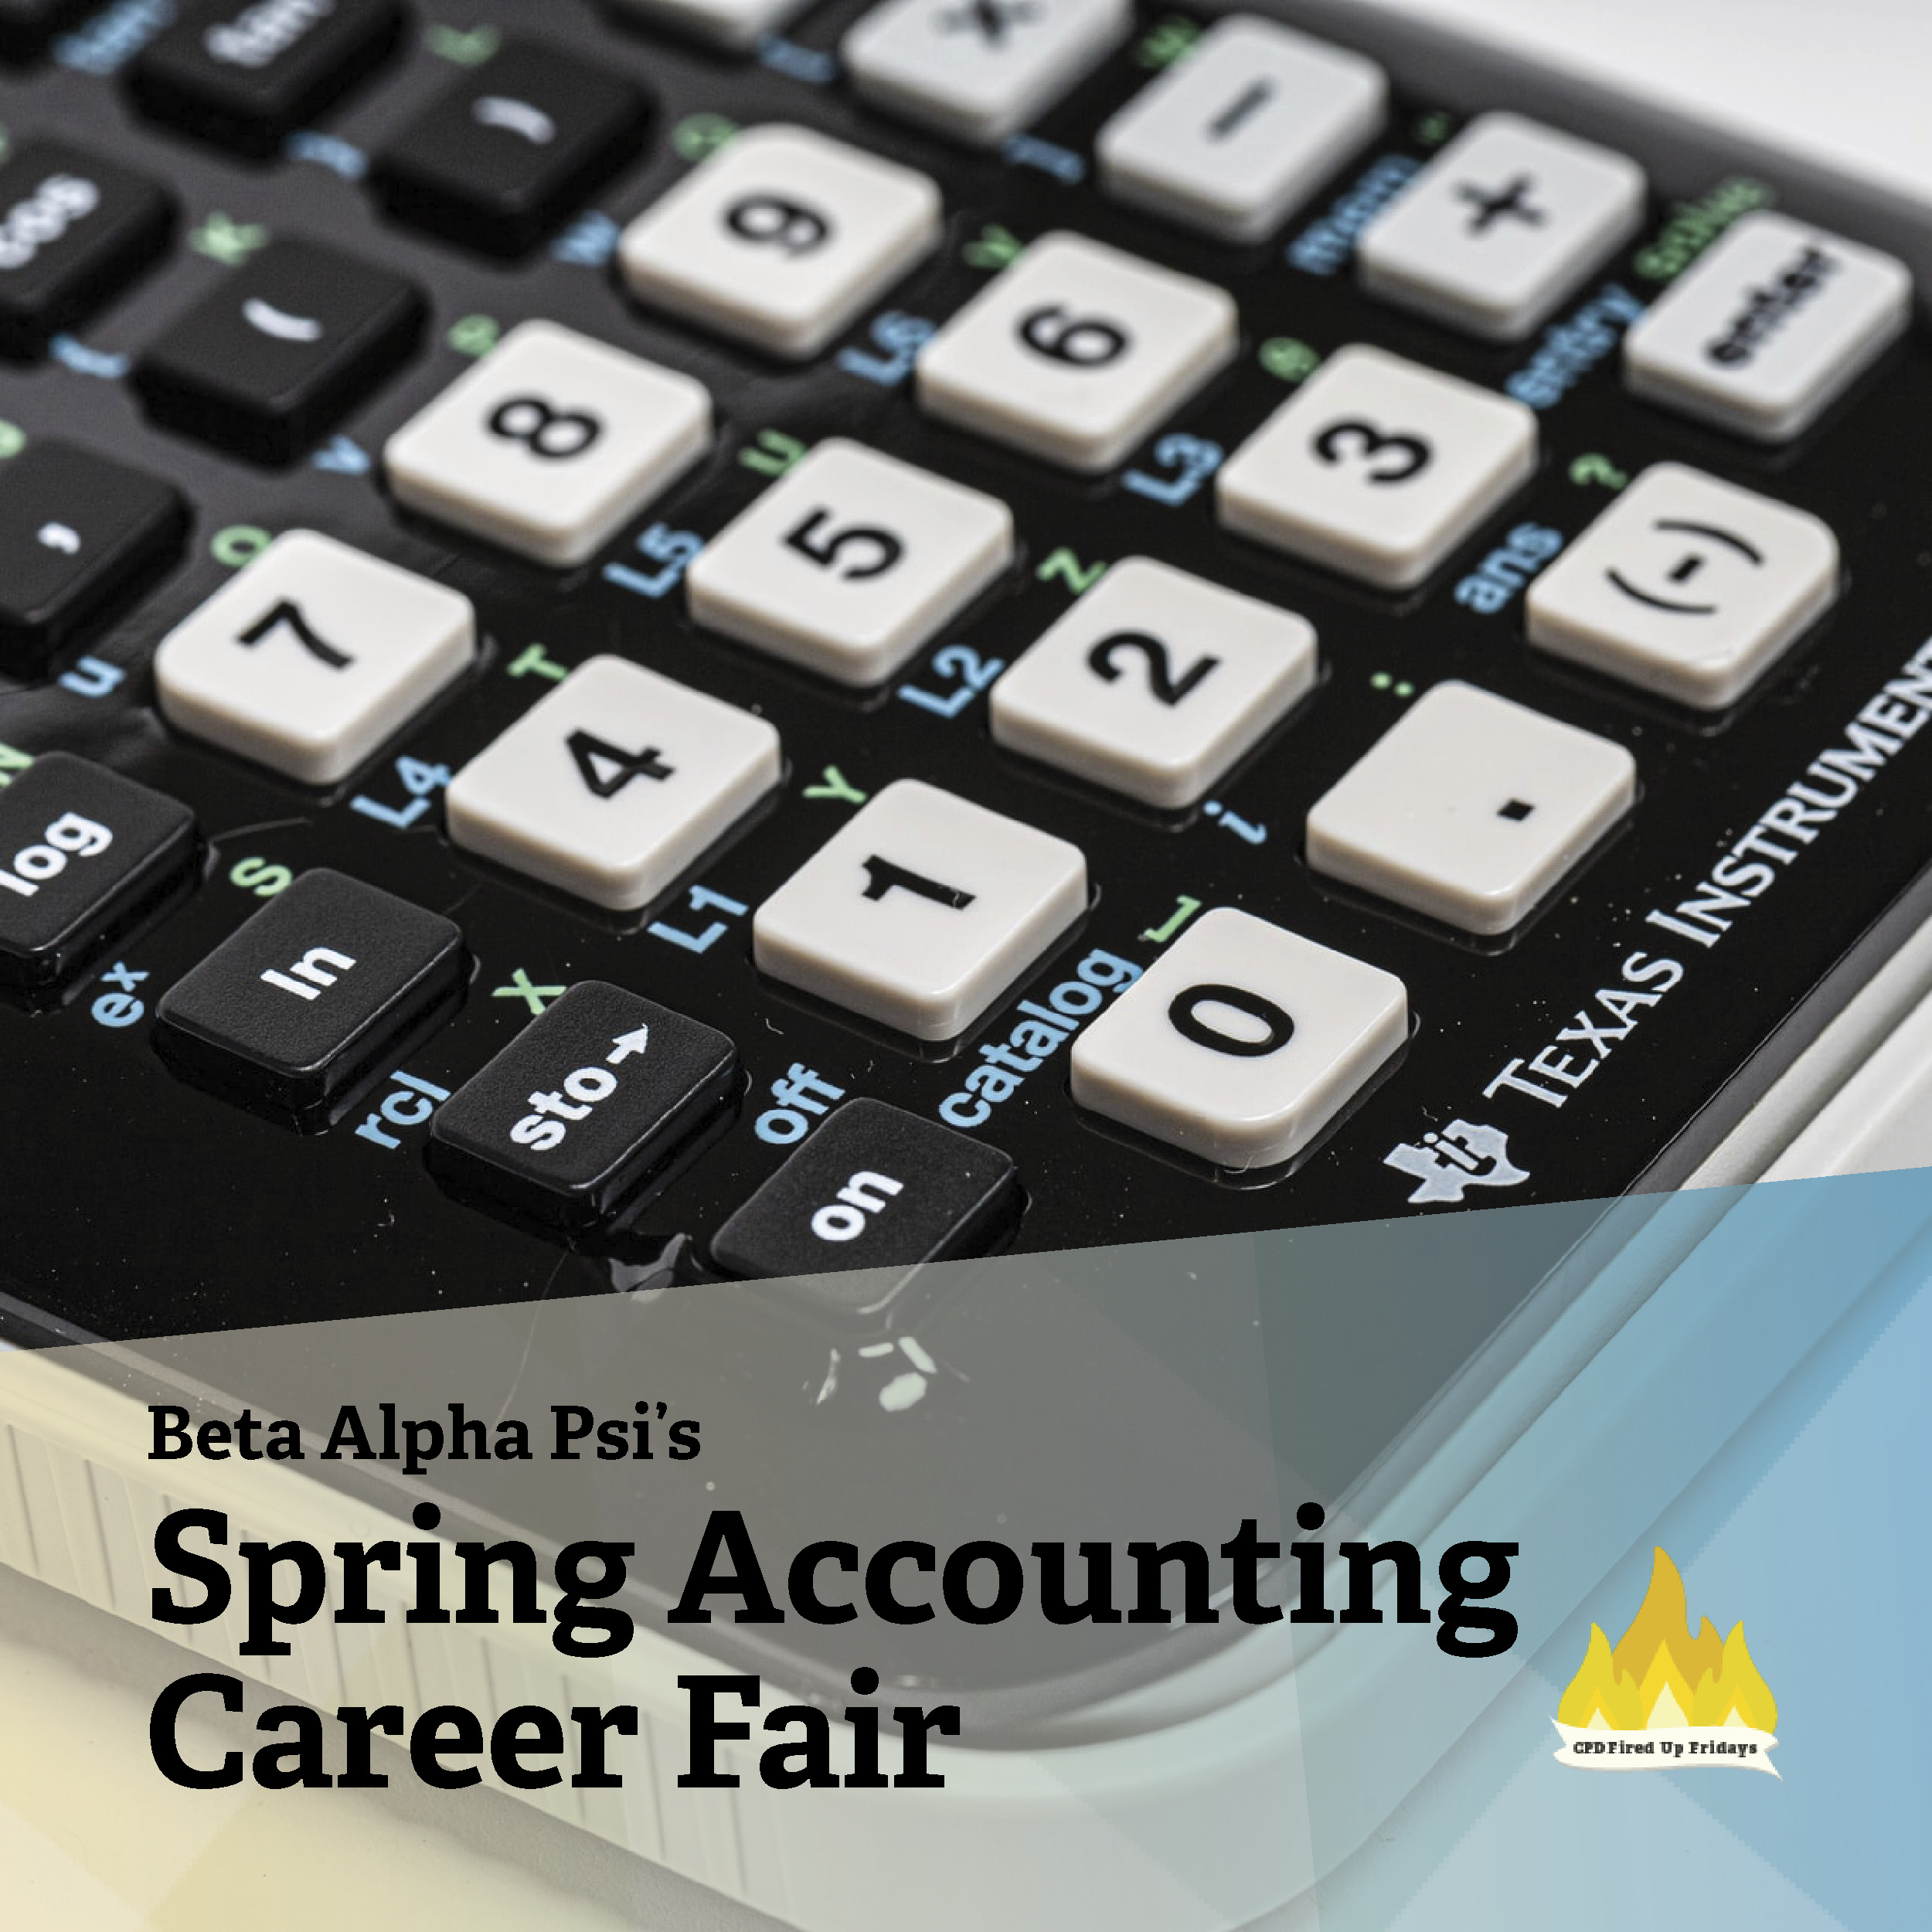 A close up of a calculator with a black body and white number keys. Underneath it, text reads: 'Beta Alpha Psi's Spring Accounting Career Fair.'